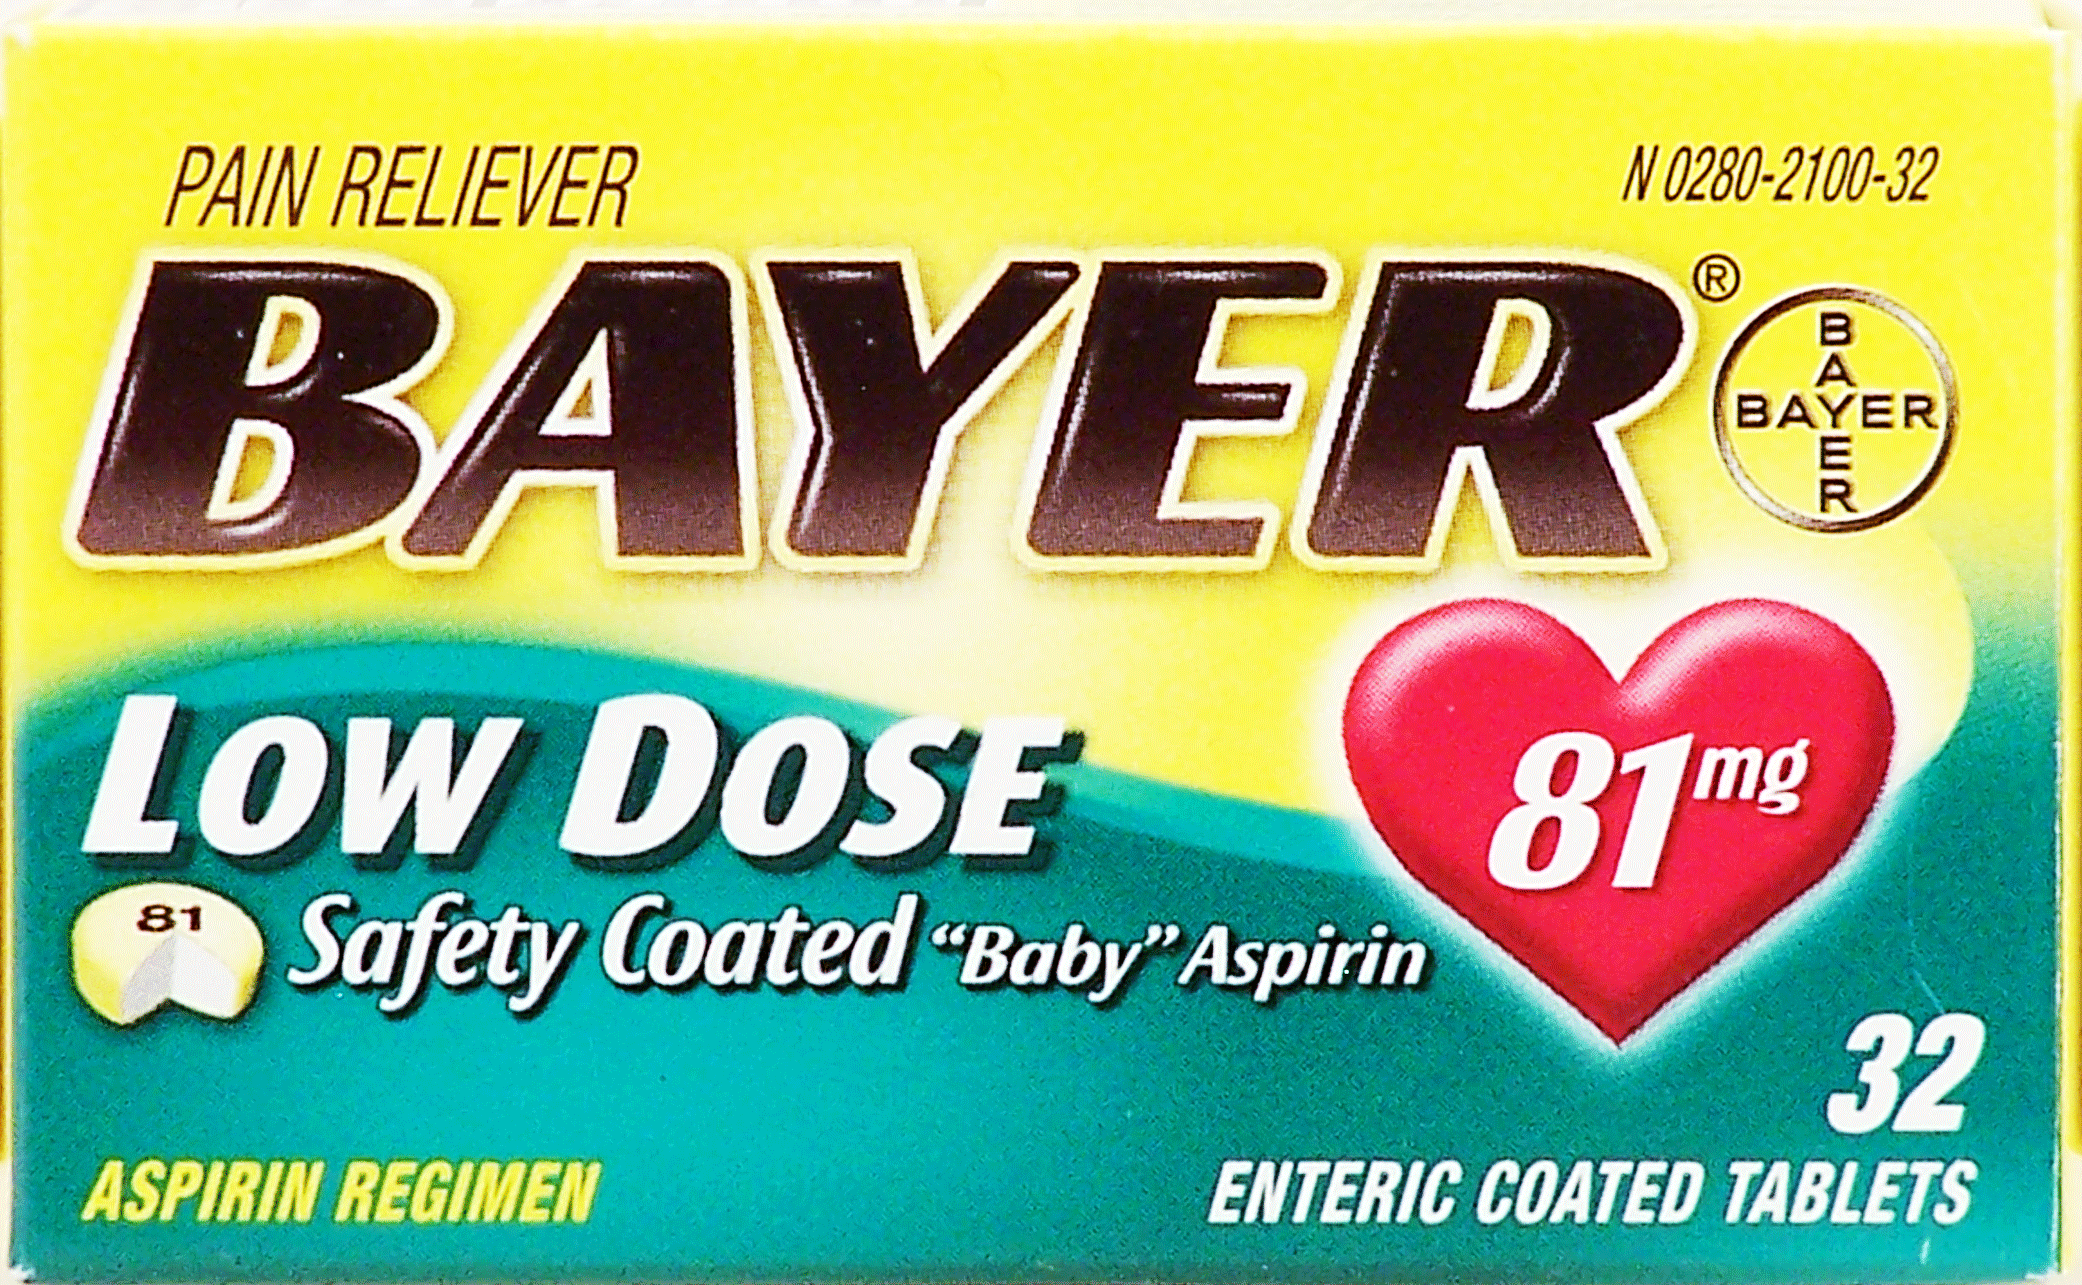 Bayer Low Dose low dose pain reliever, 81 mg Full-Size Picture